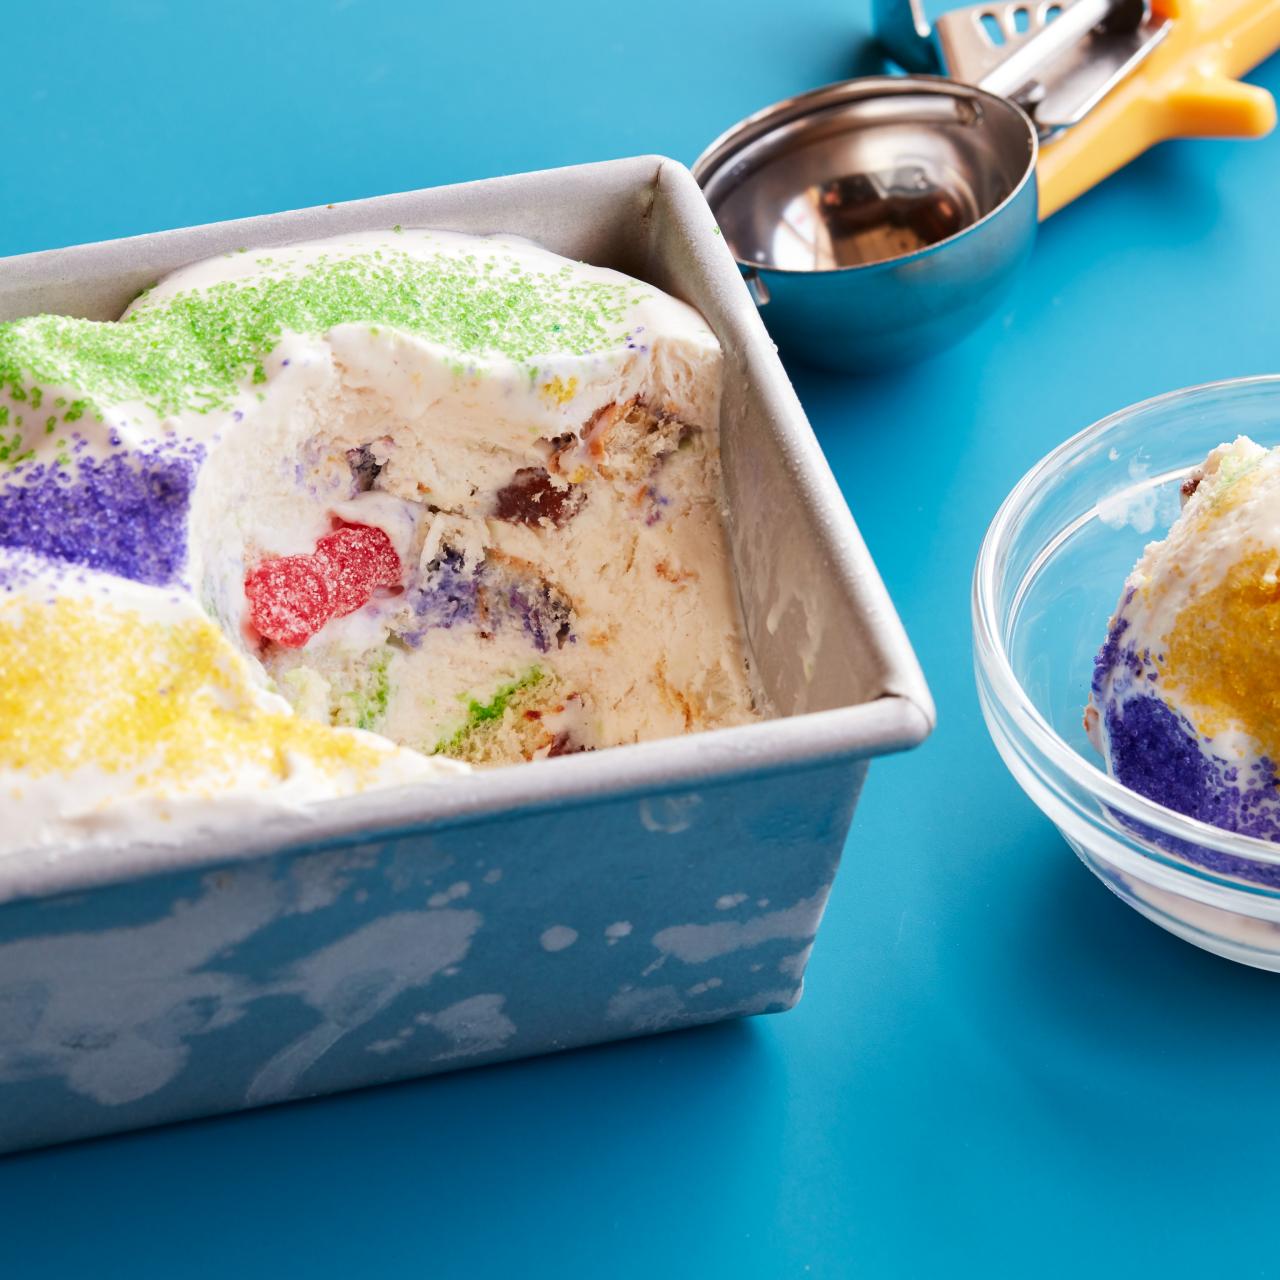 Mardi Gras King Cake ice cream will be anywhere Blue Bell is sold